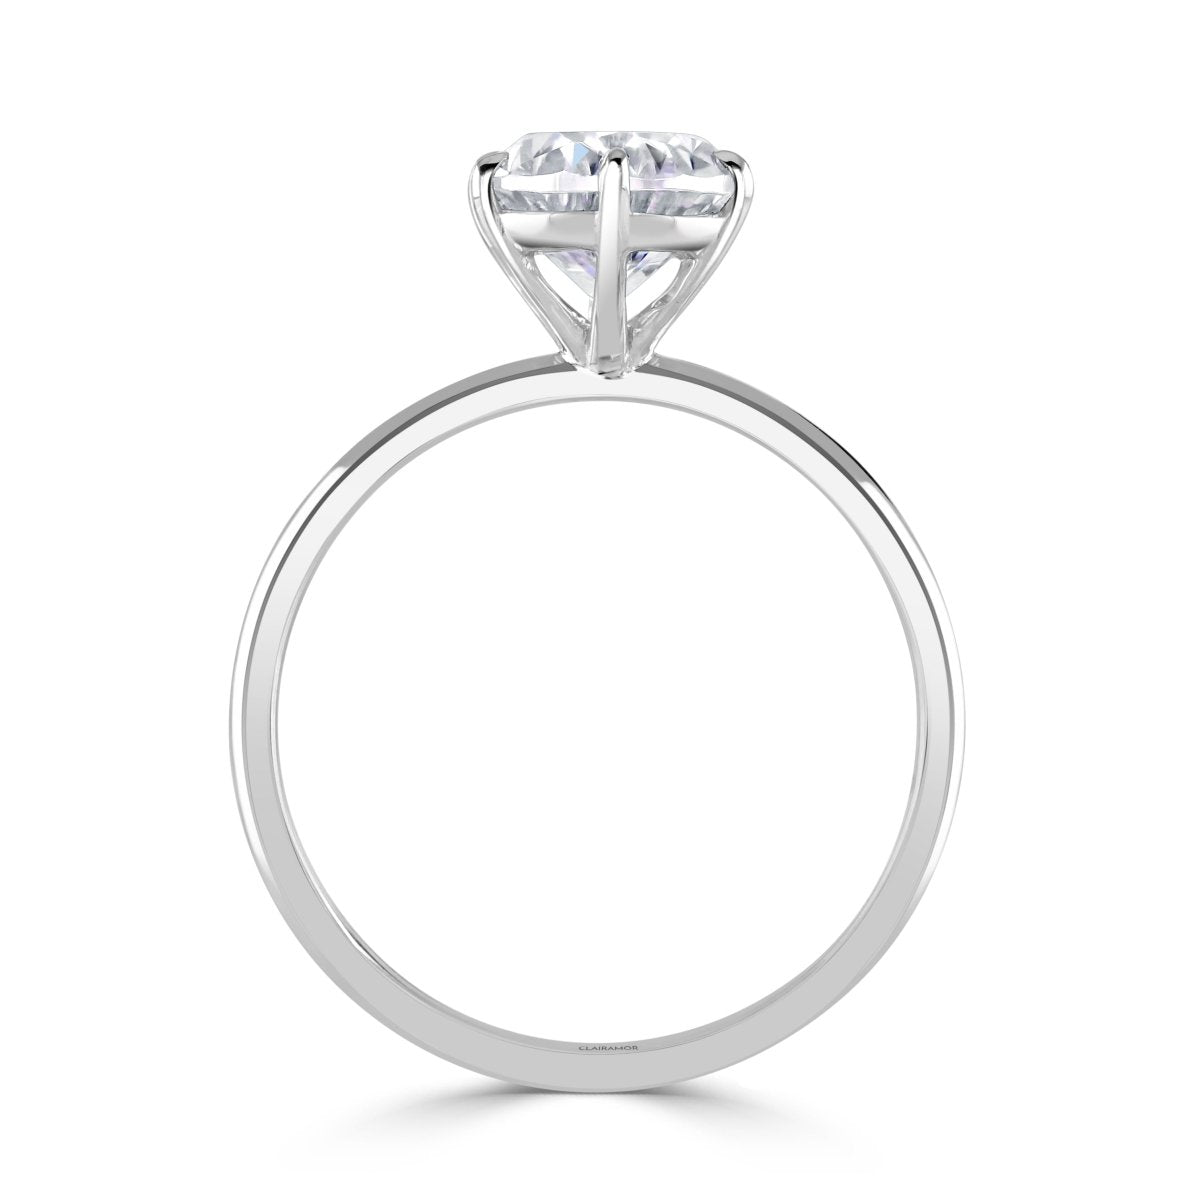 Oval Six Prong Solitaire Diamond Engagement Ring